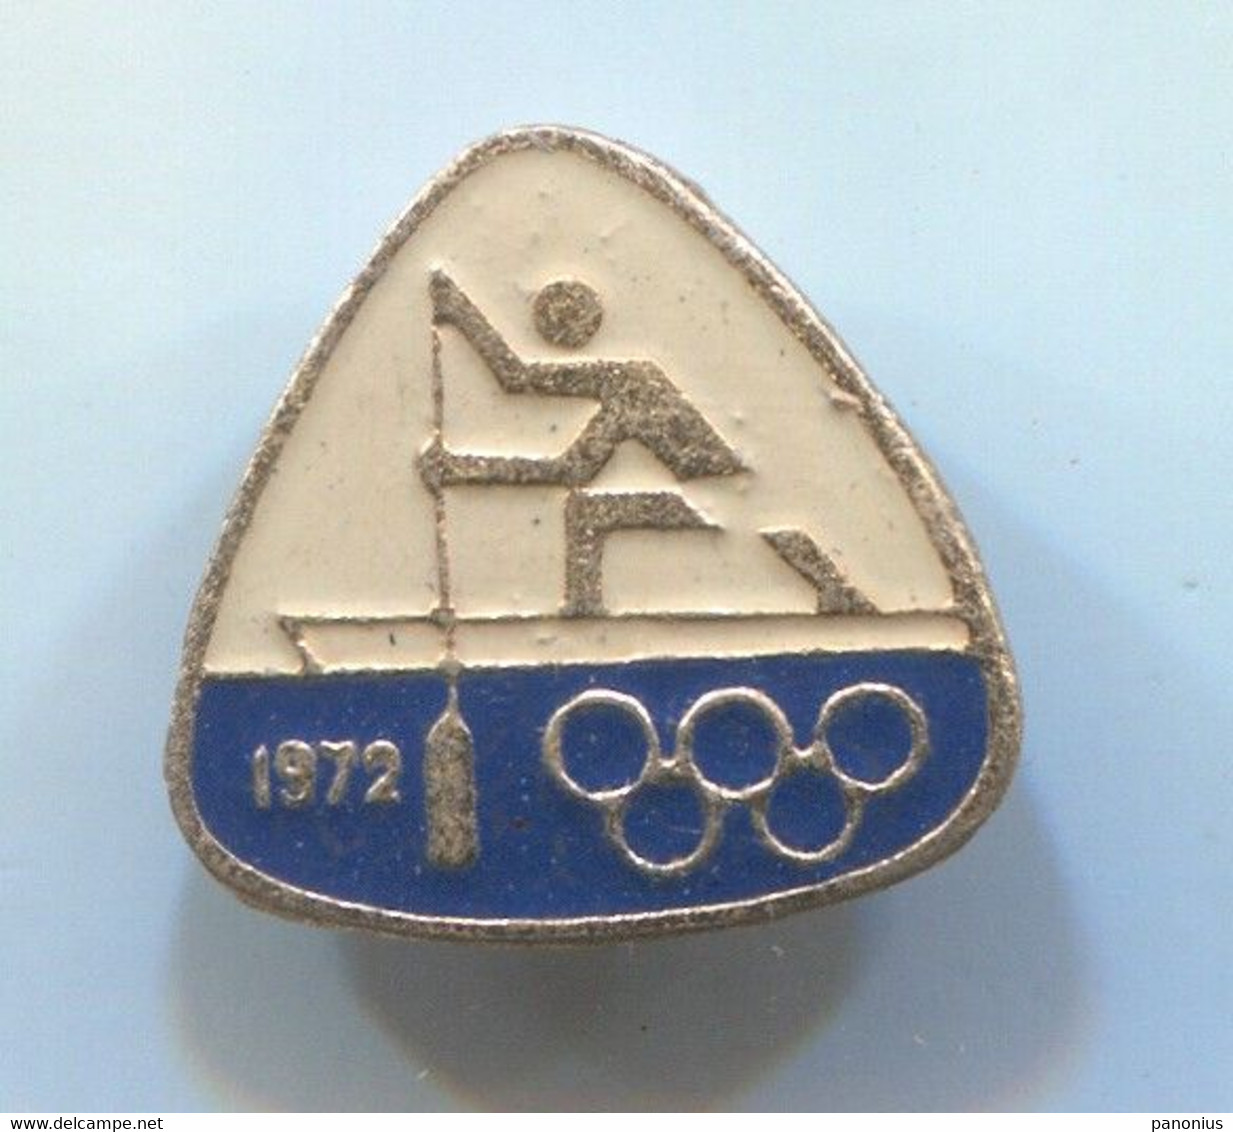 ROWING CANOE KAYAK - OLYMPIADE MUNCHEN 1972. RUSSIAN VINTAGE PIN, BADGE, ABZEICHEN - Remo